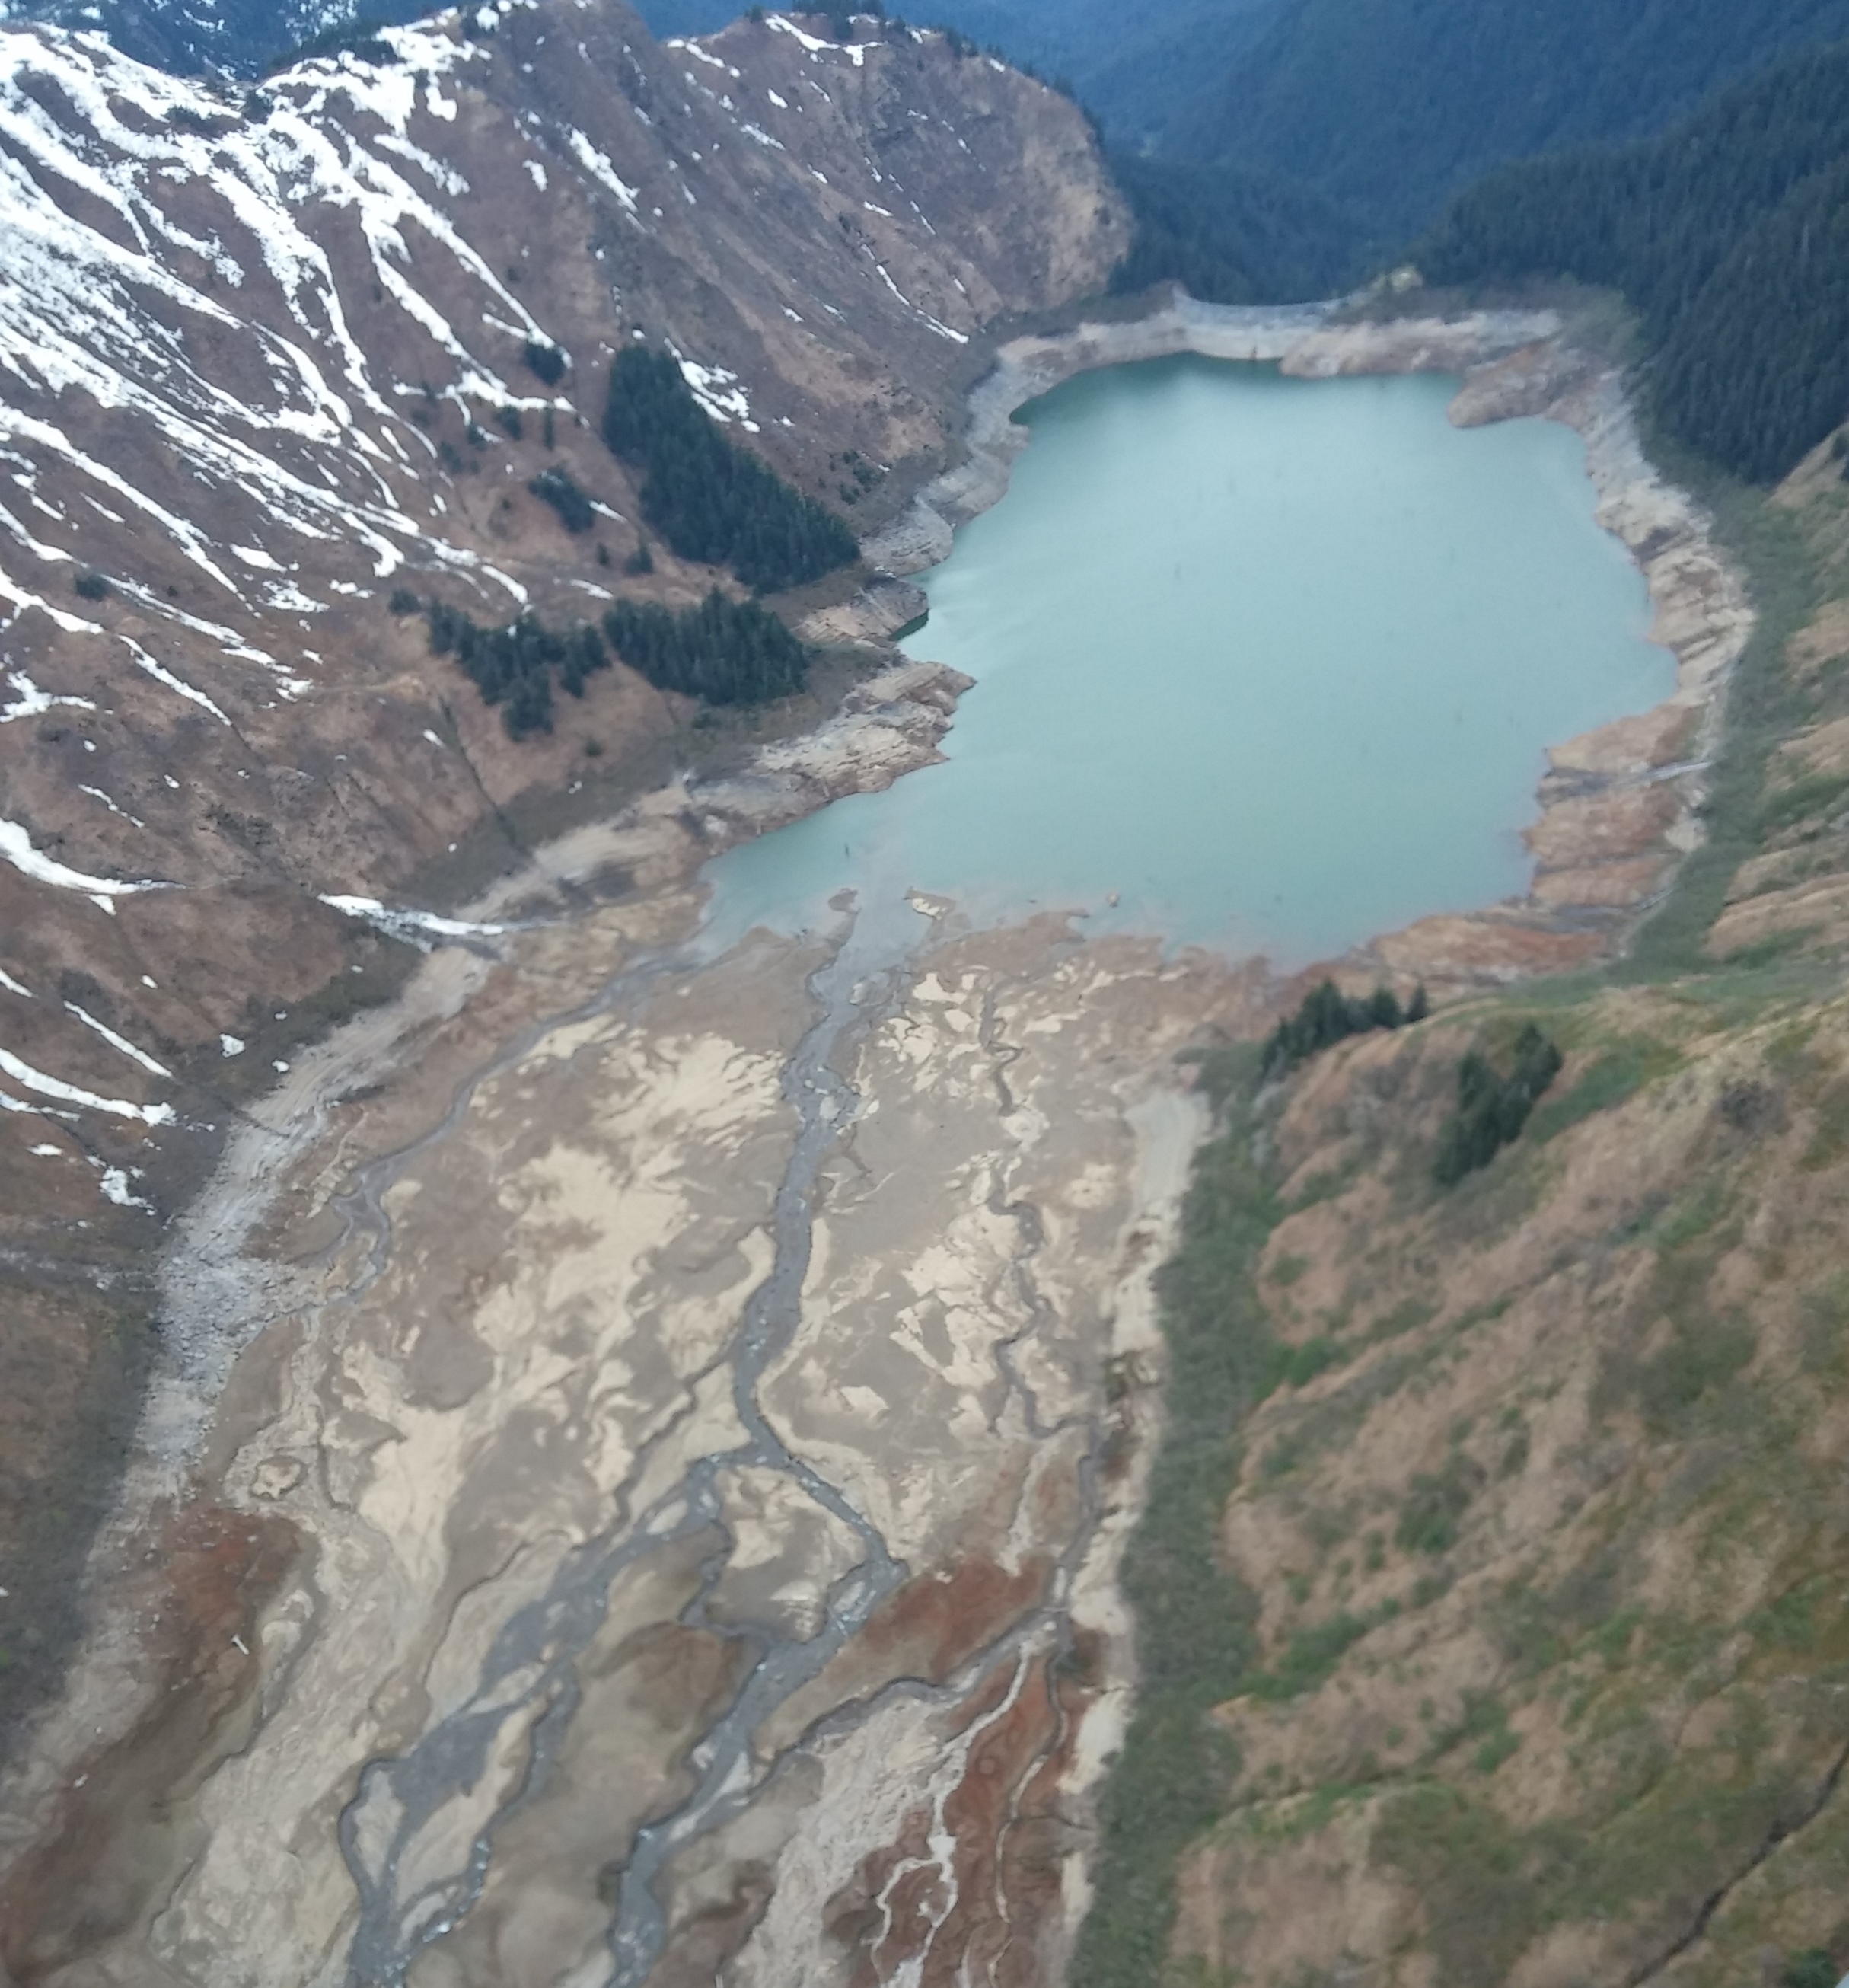 Channels at the upper end of Salmon Creek may be the source of much of the turbidity in the lake during spring runoff. (Photo courtesy Scott Willis/Alaska Electric Light and Power) 